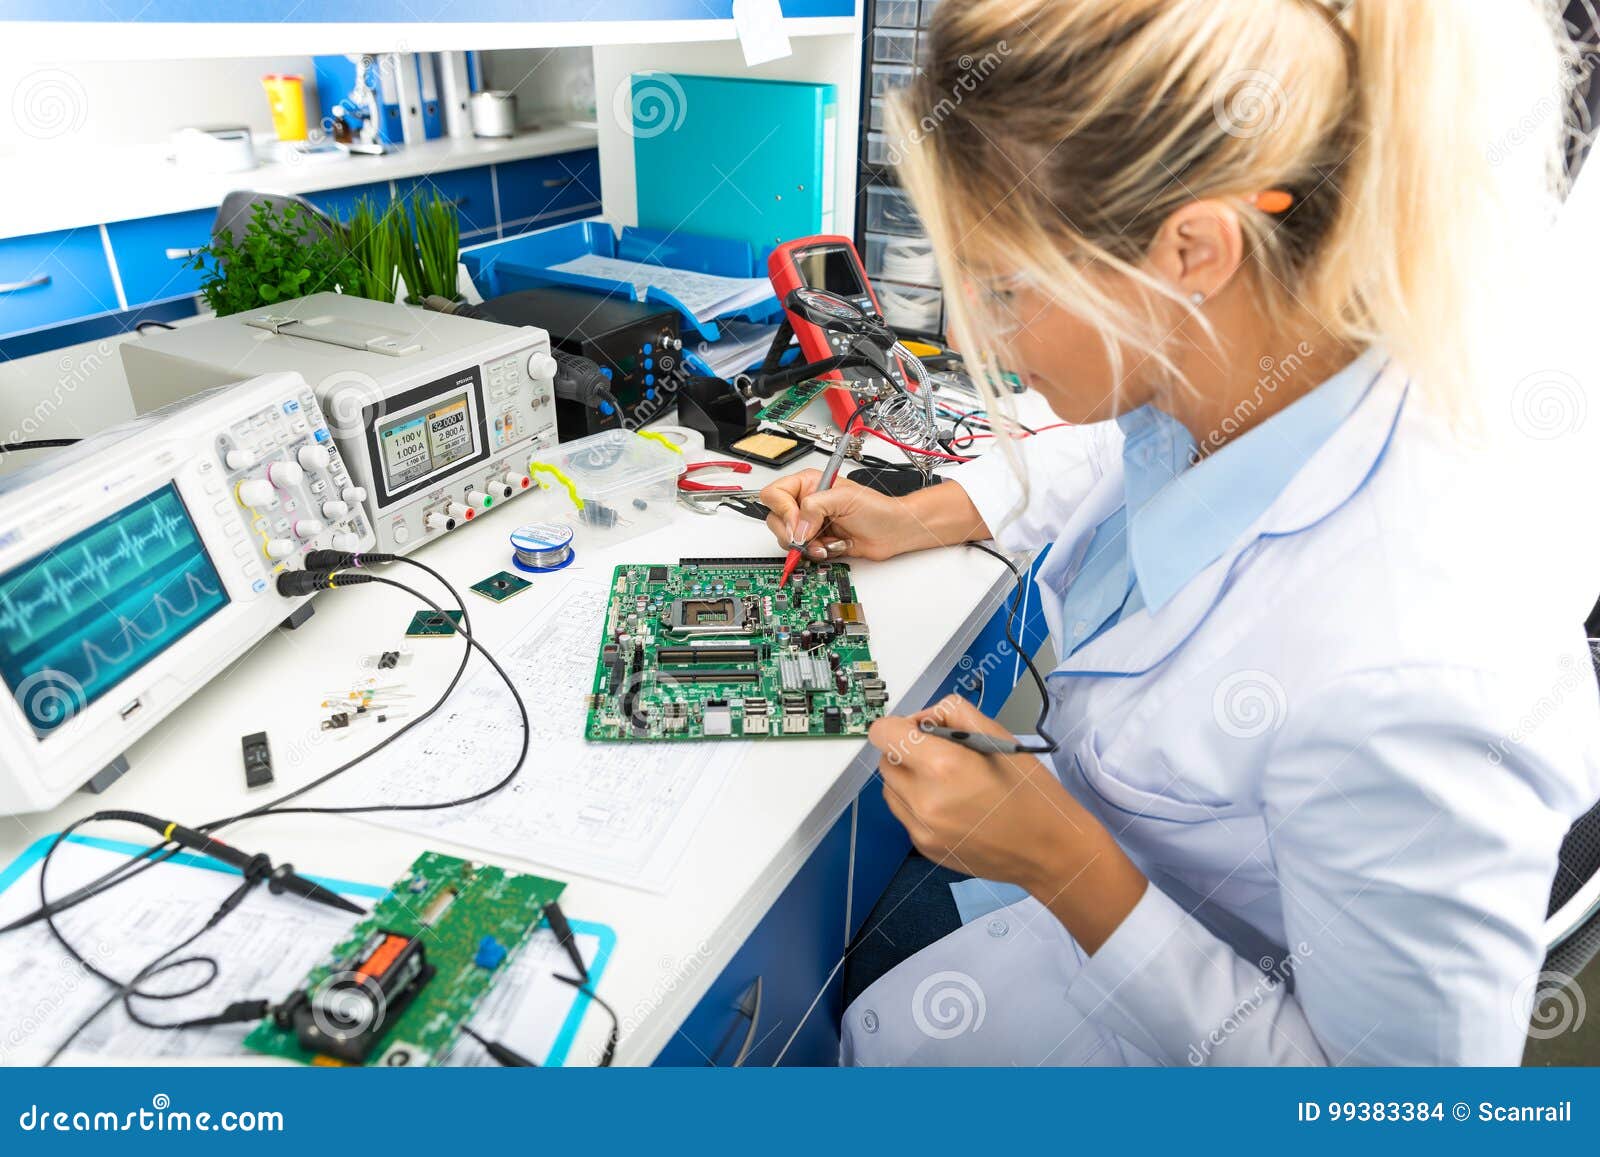 female electronic engineer testing computer motherboard in labor